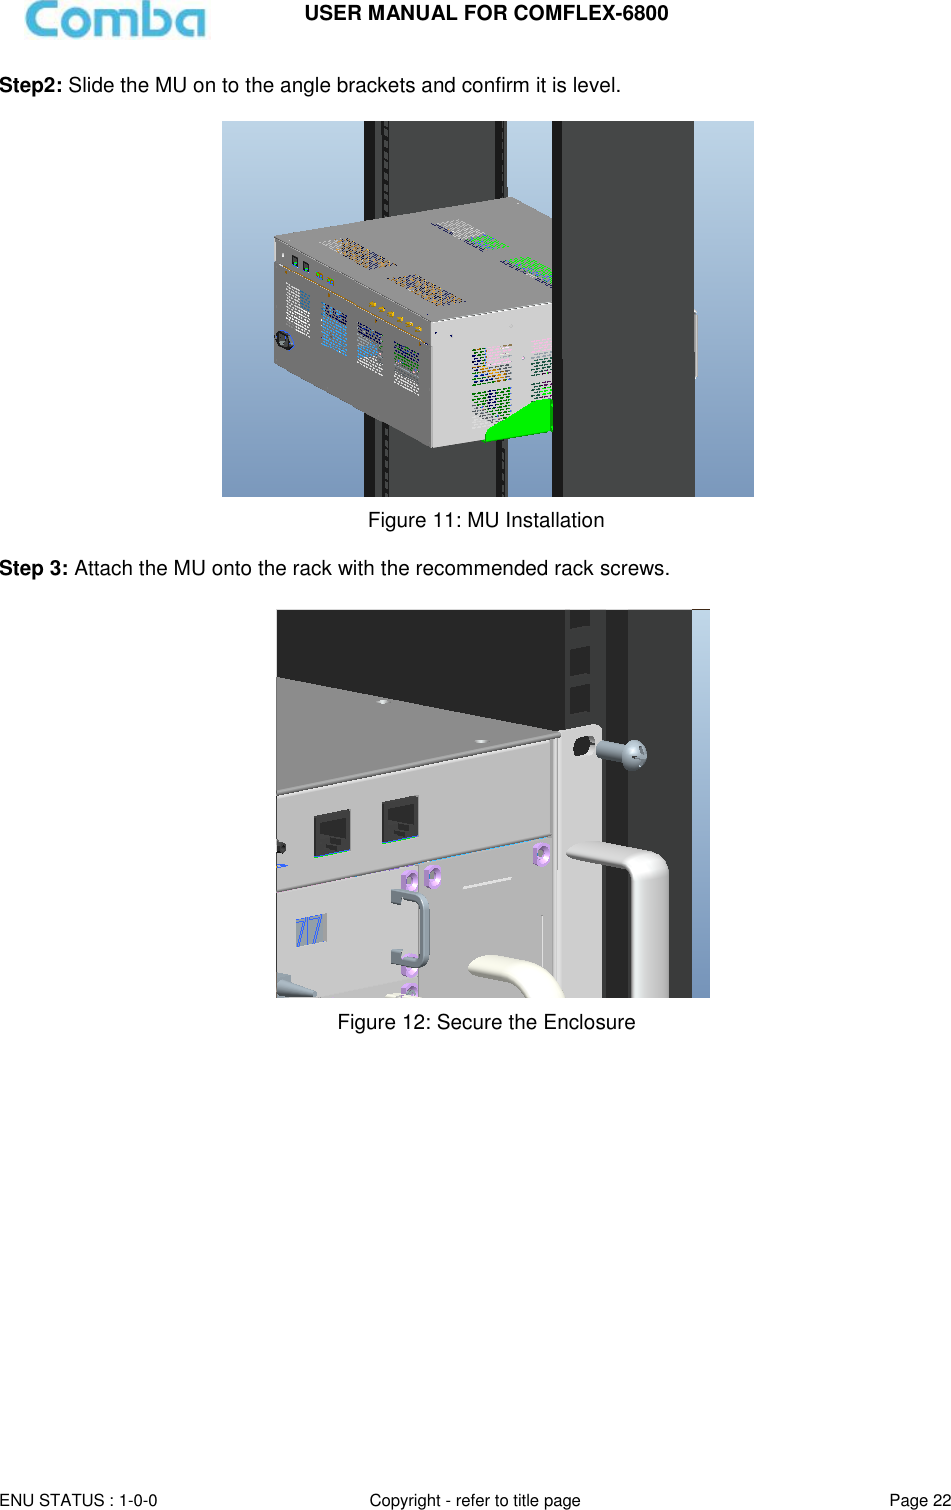 USER MANUAL FOR COMFLEX-6800  ENU STATUS : 1-0-0 Copyright - refer to title page Page 22  Step2: Slide the MU on to the angle brackets and confirm it is level.   Figure 11: MU Installation  Step 3: Attach the MU onto the rack with the recommended rack screws.   Figure 12: Secure the Enclosure     